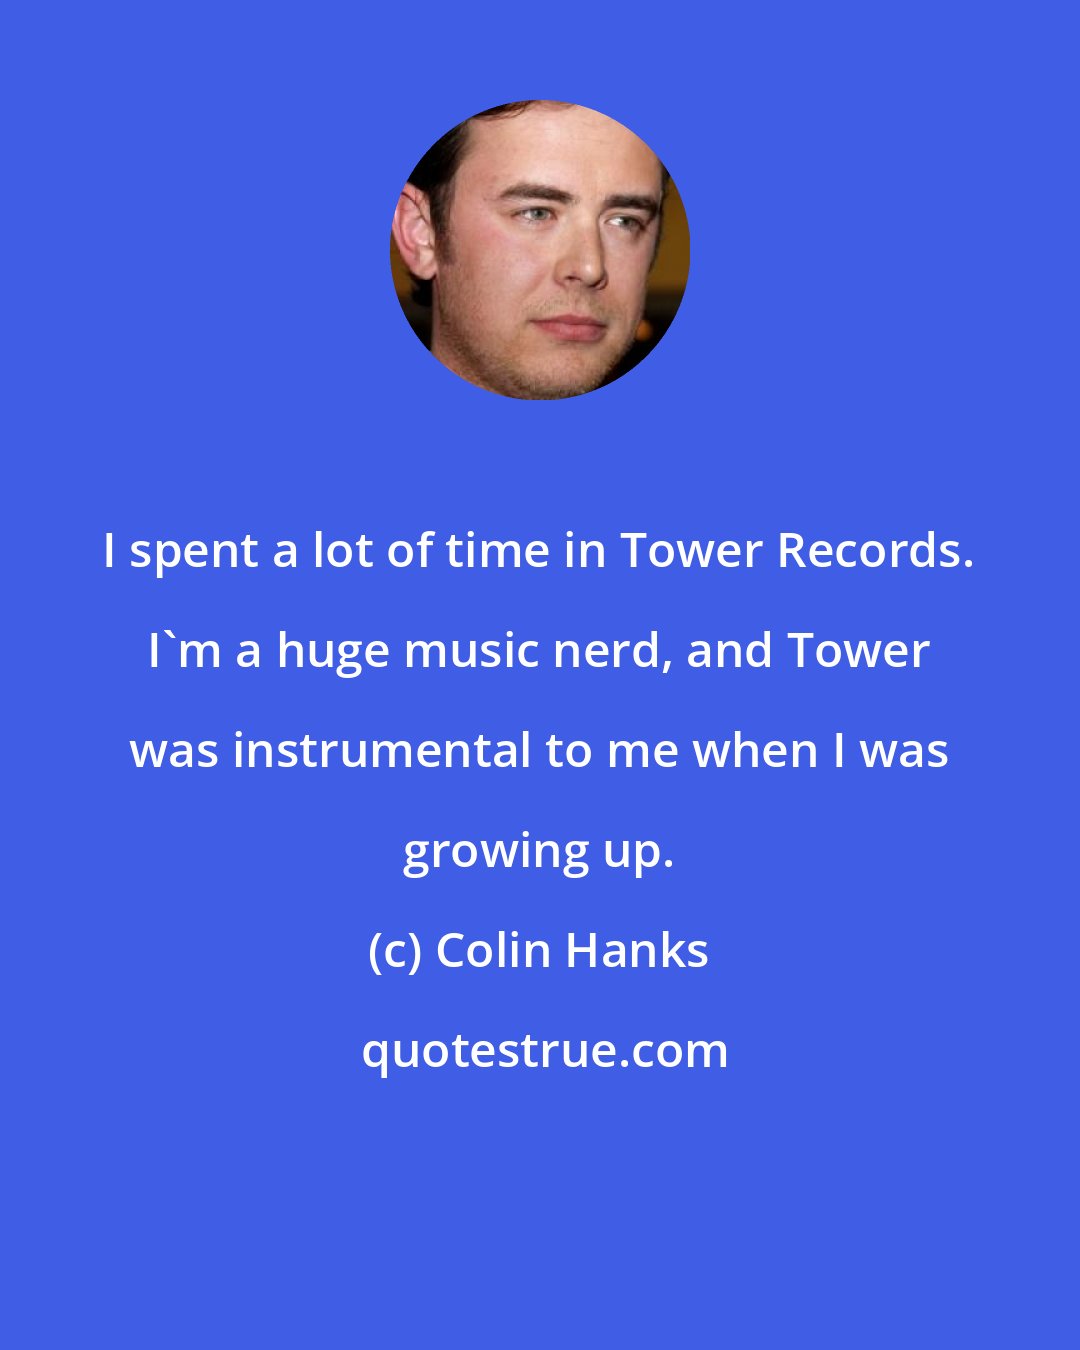 Colin Hanks: I spent a lot of time in Tower Records. I'm a huge music nerd, and Tower was instrumental to me when I was growing up.